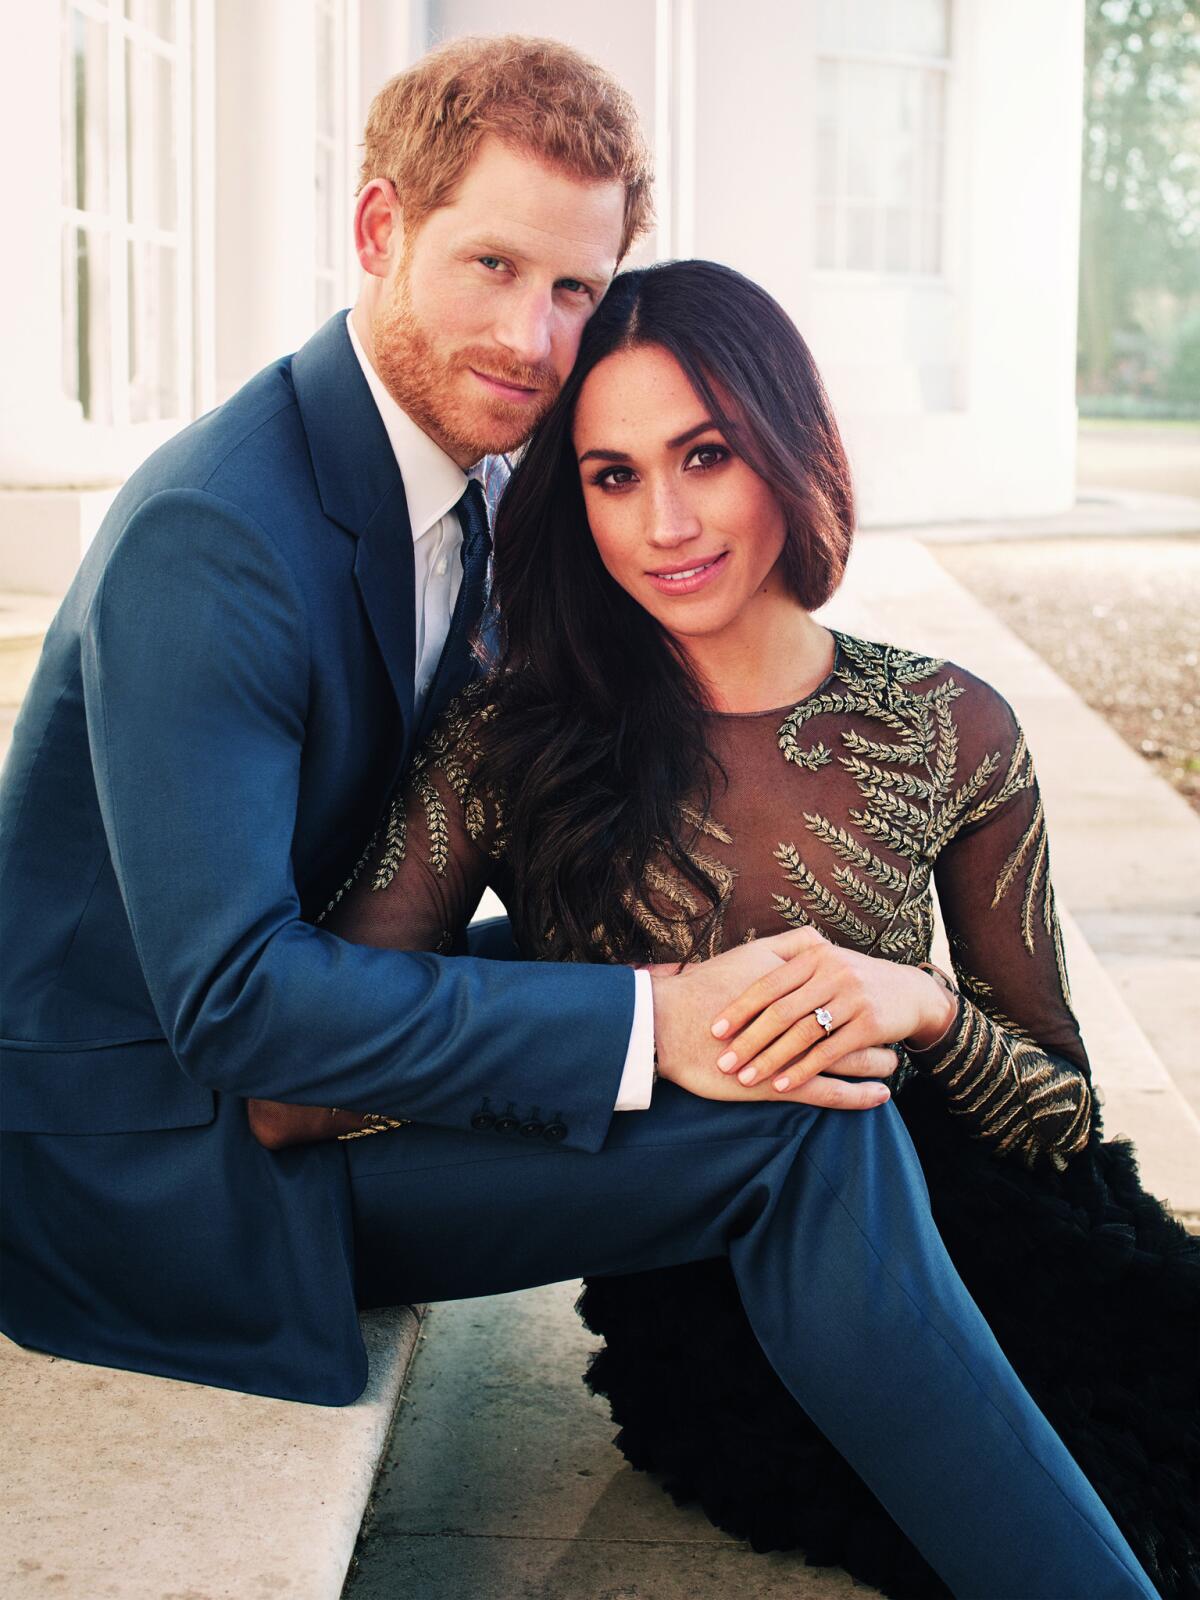 Prince Harry and fiancée Meghan Markle, who's wearing a Ralph & Russo dress, pose for official engagement photos at Frogmore House in December 2017 in Windsor, Britain.